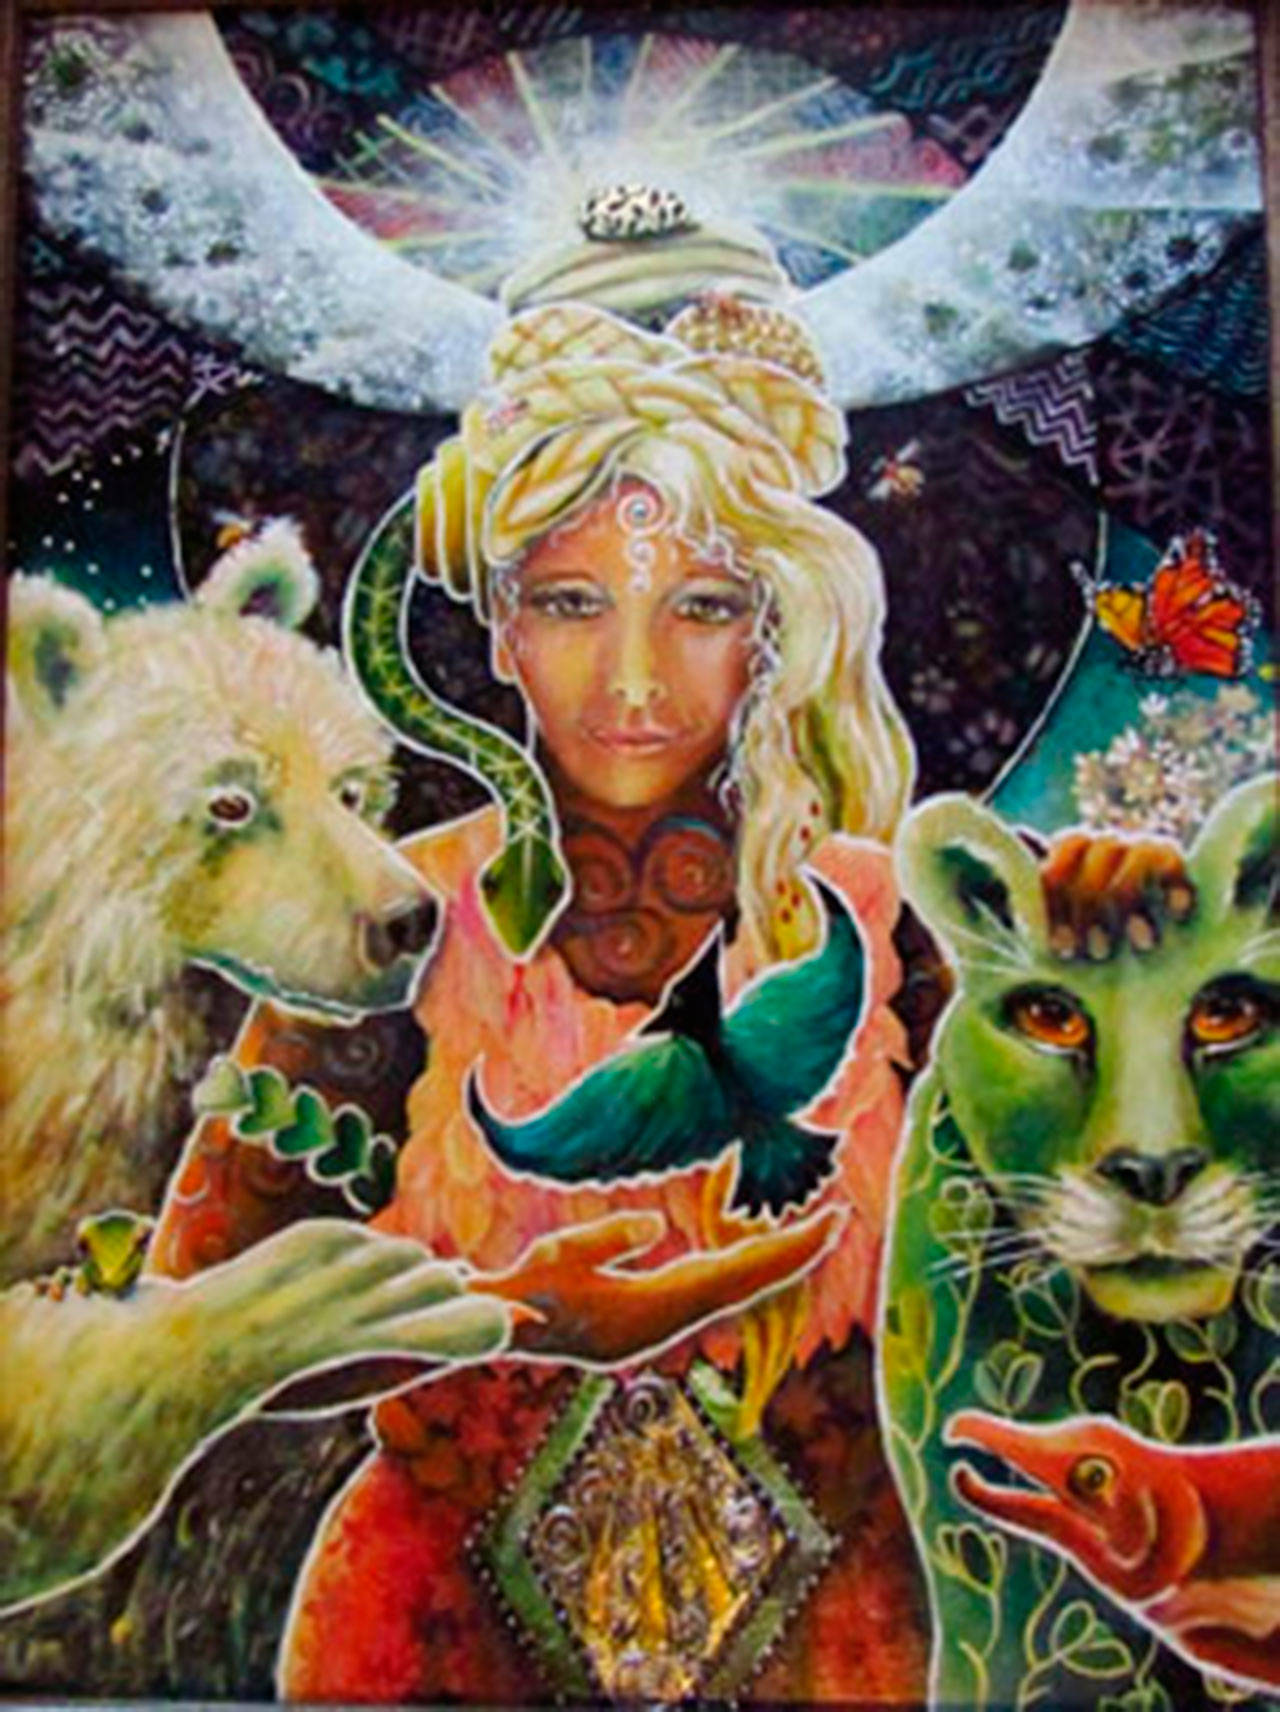 Image courtesy of Jeffrey Moose | “She Who Gives Voice to their Stories” by Deborah Milton, one of a group of artists with work featured in “Goddesses 8: She Persists.”